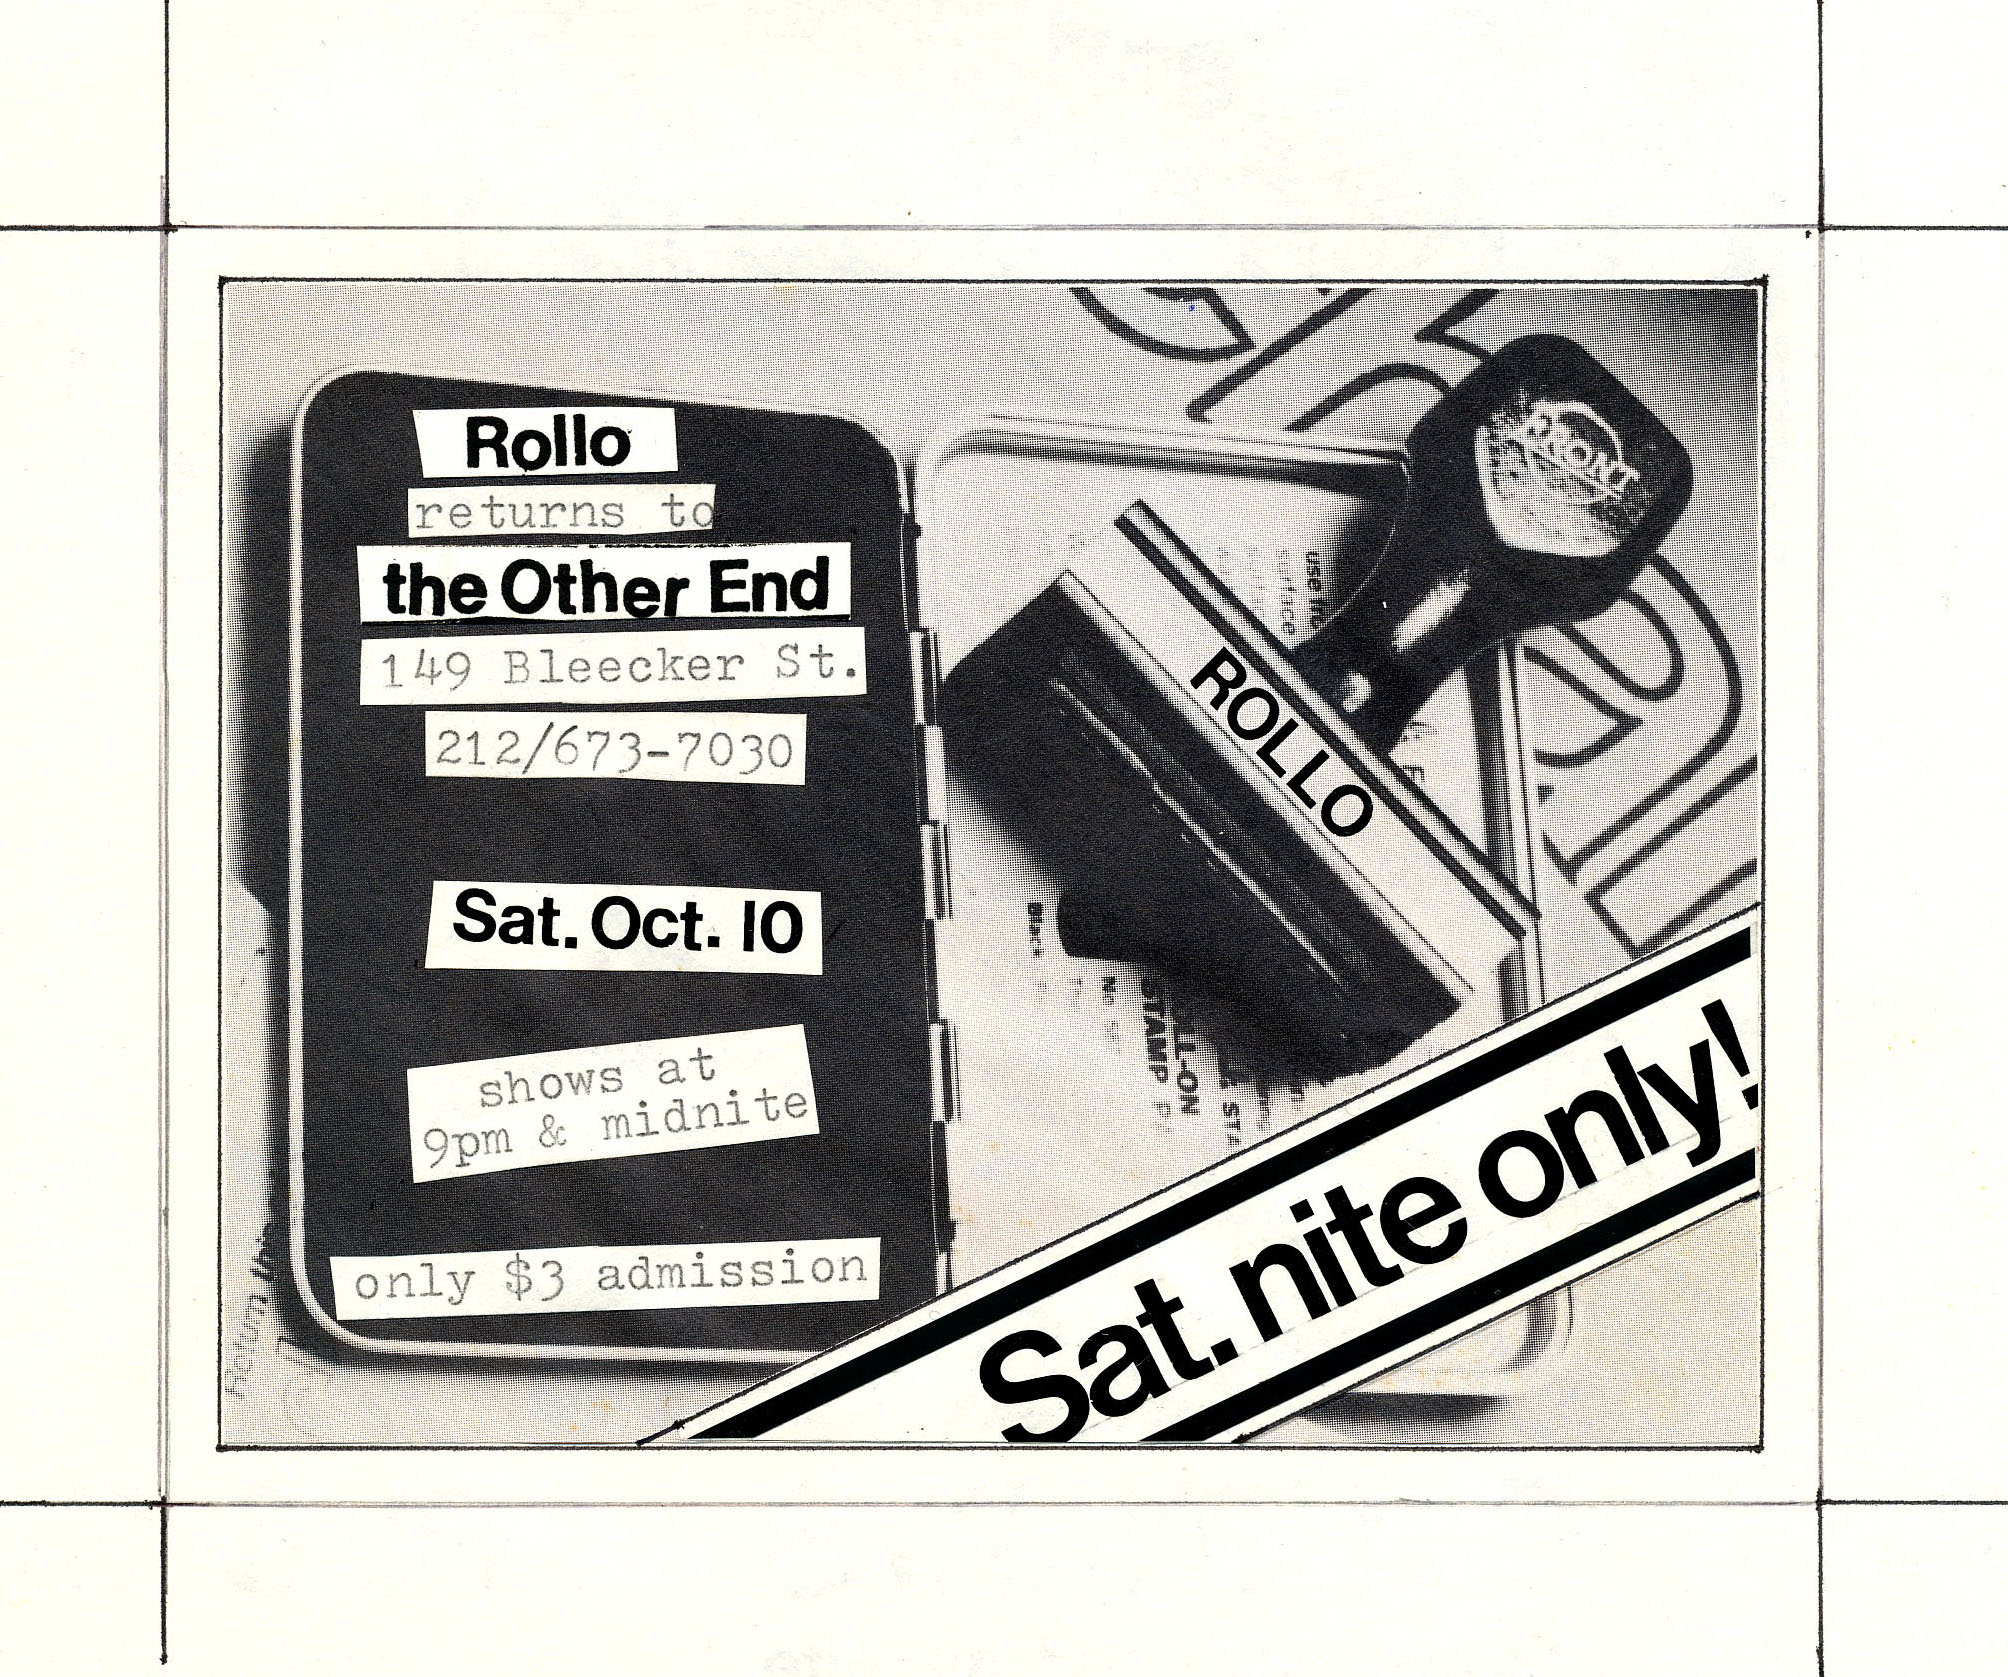 Rollo ad for The Other End in Village Voice for 10-10-1981 performance